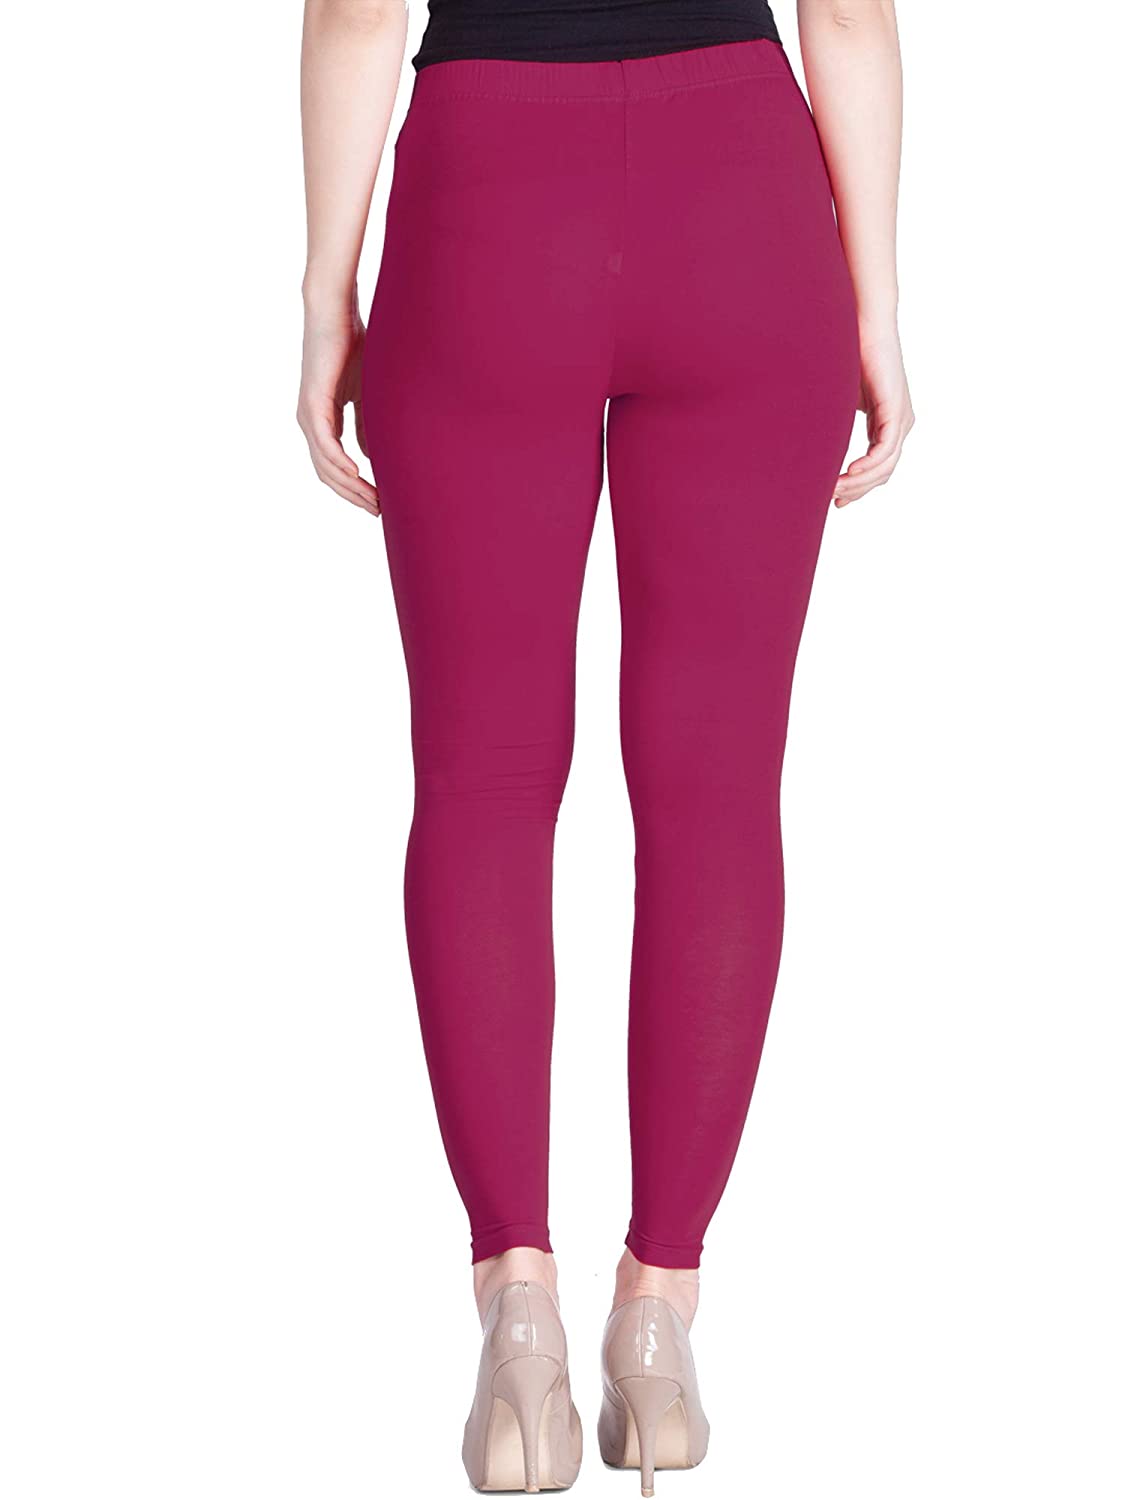 Lux Lyra Ankle Length Pink Leggings free Size for Woman – Stilento